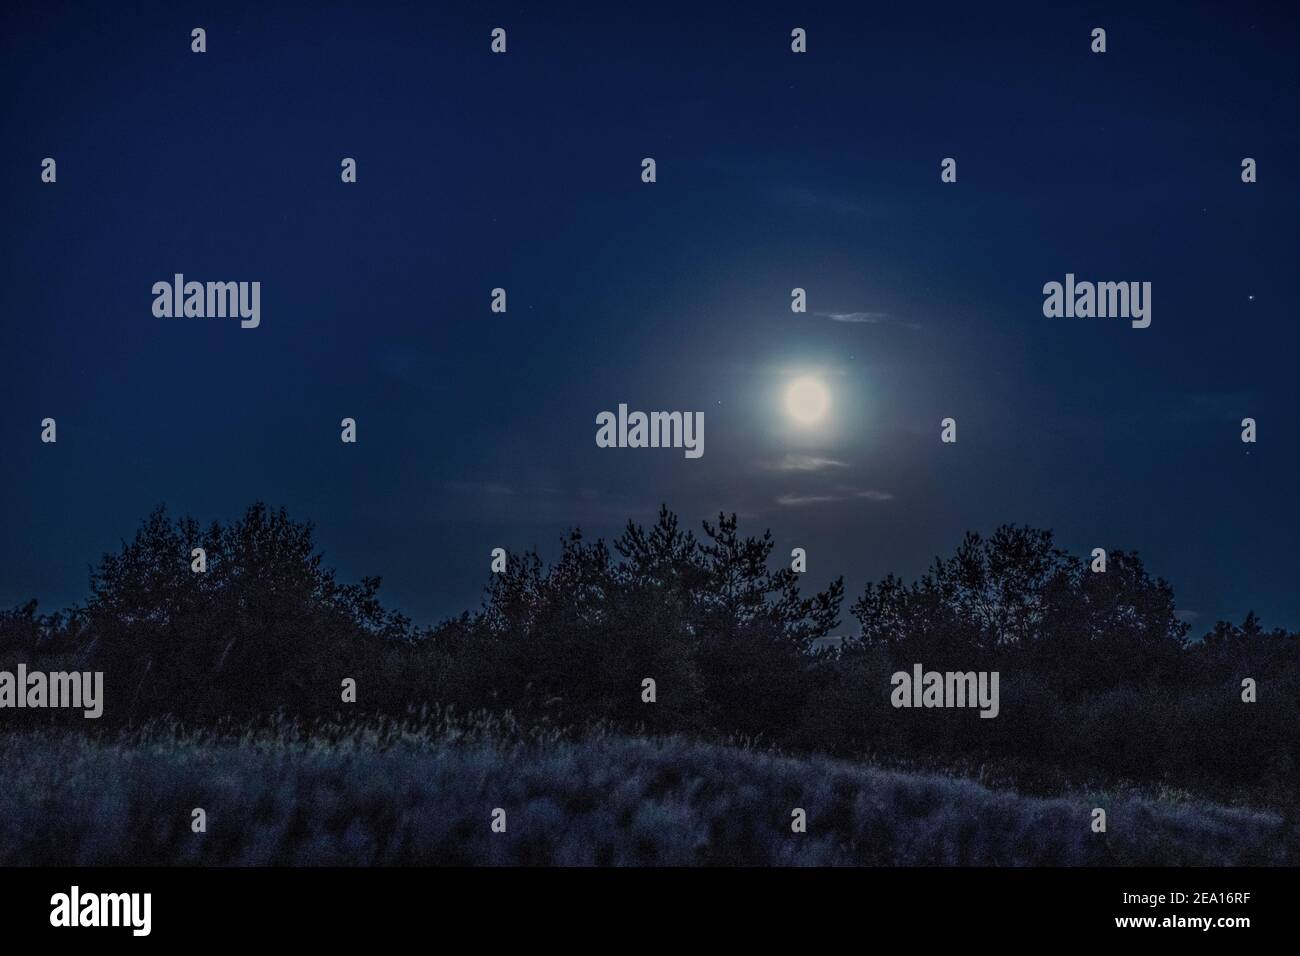 A full moon shining over a rural heather landscape at night at Doeberitzer Heide Stock Photo